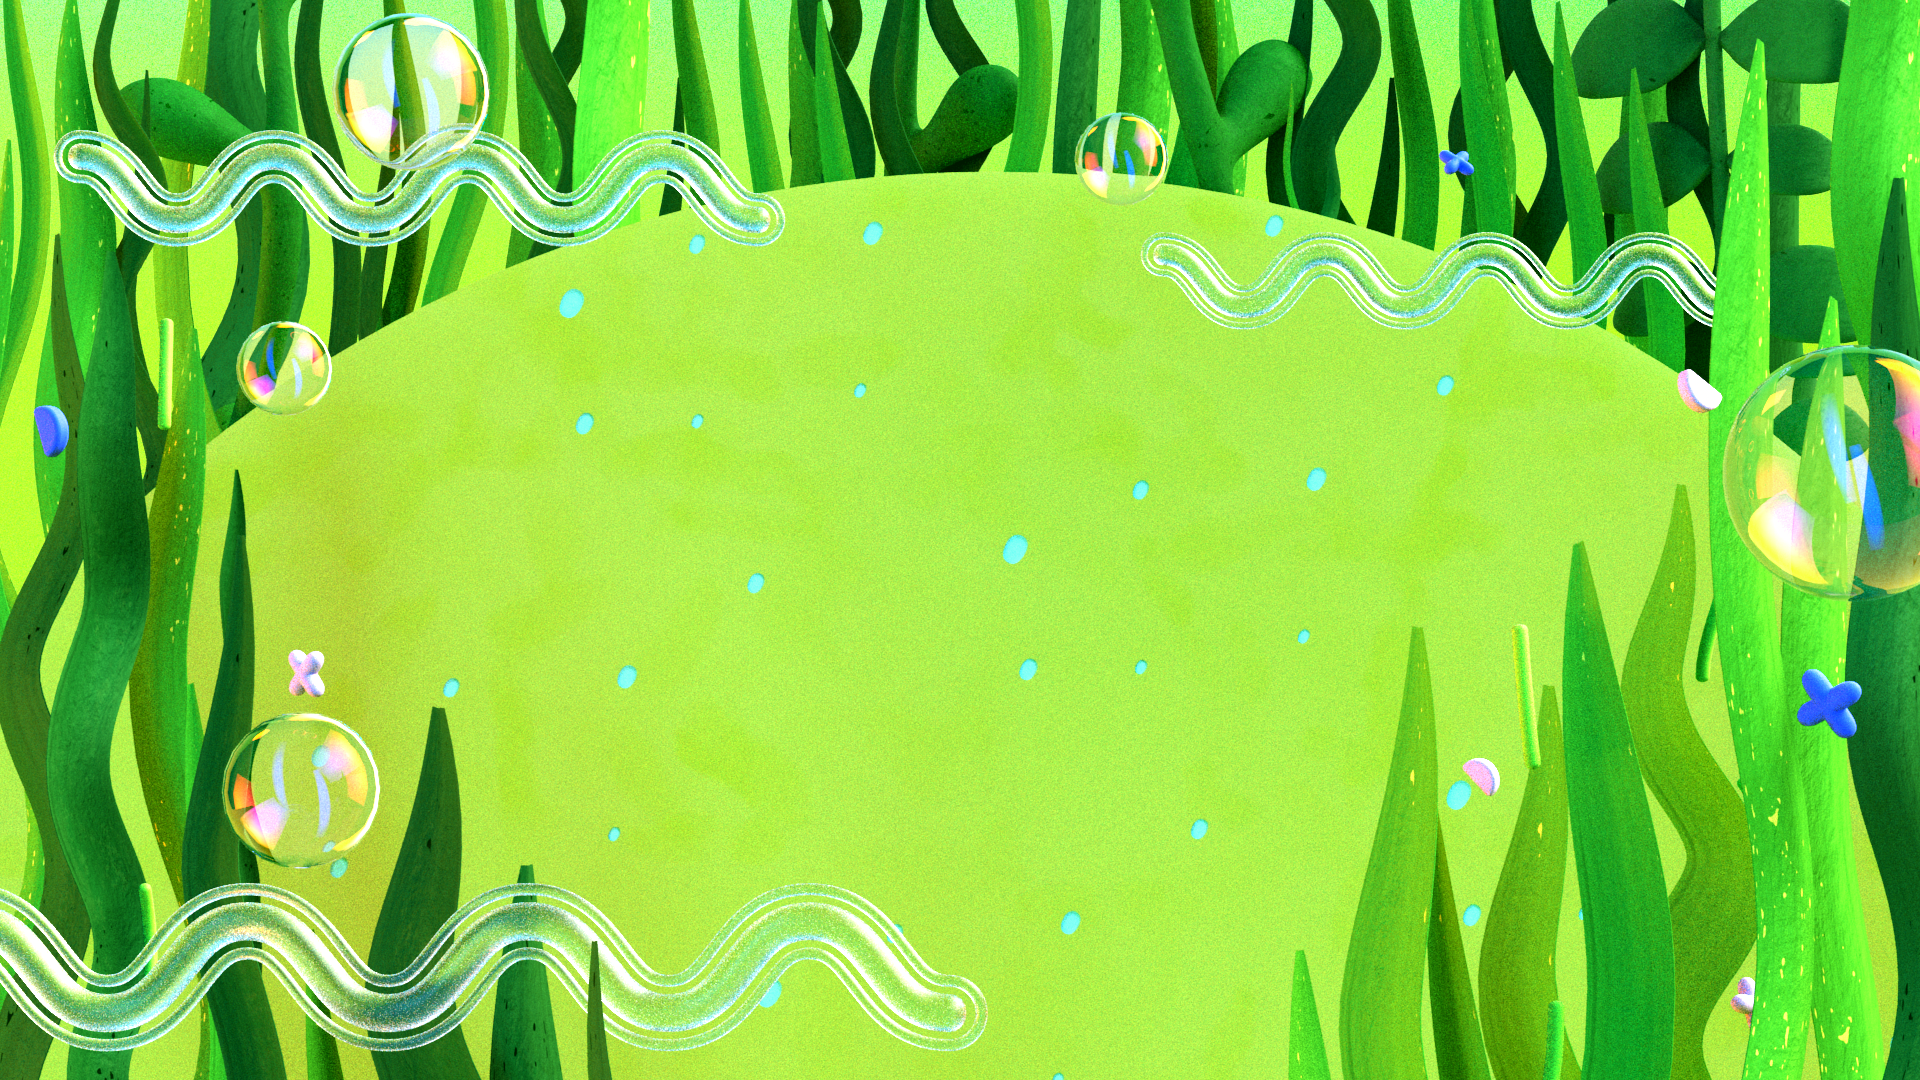 KK_CE_0XX_SOLID_BG_SEAWEED_FOREST_0410a.png